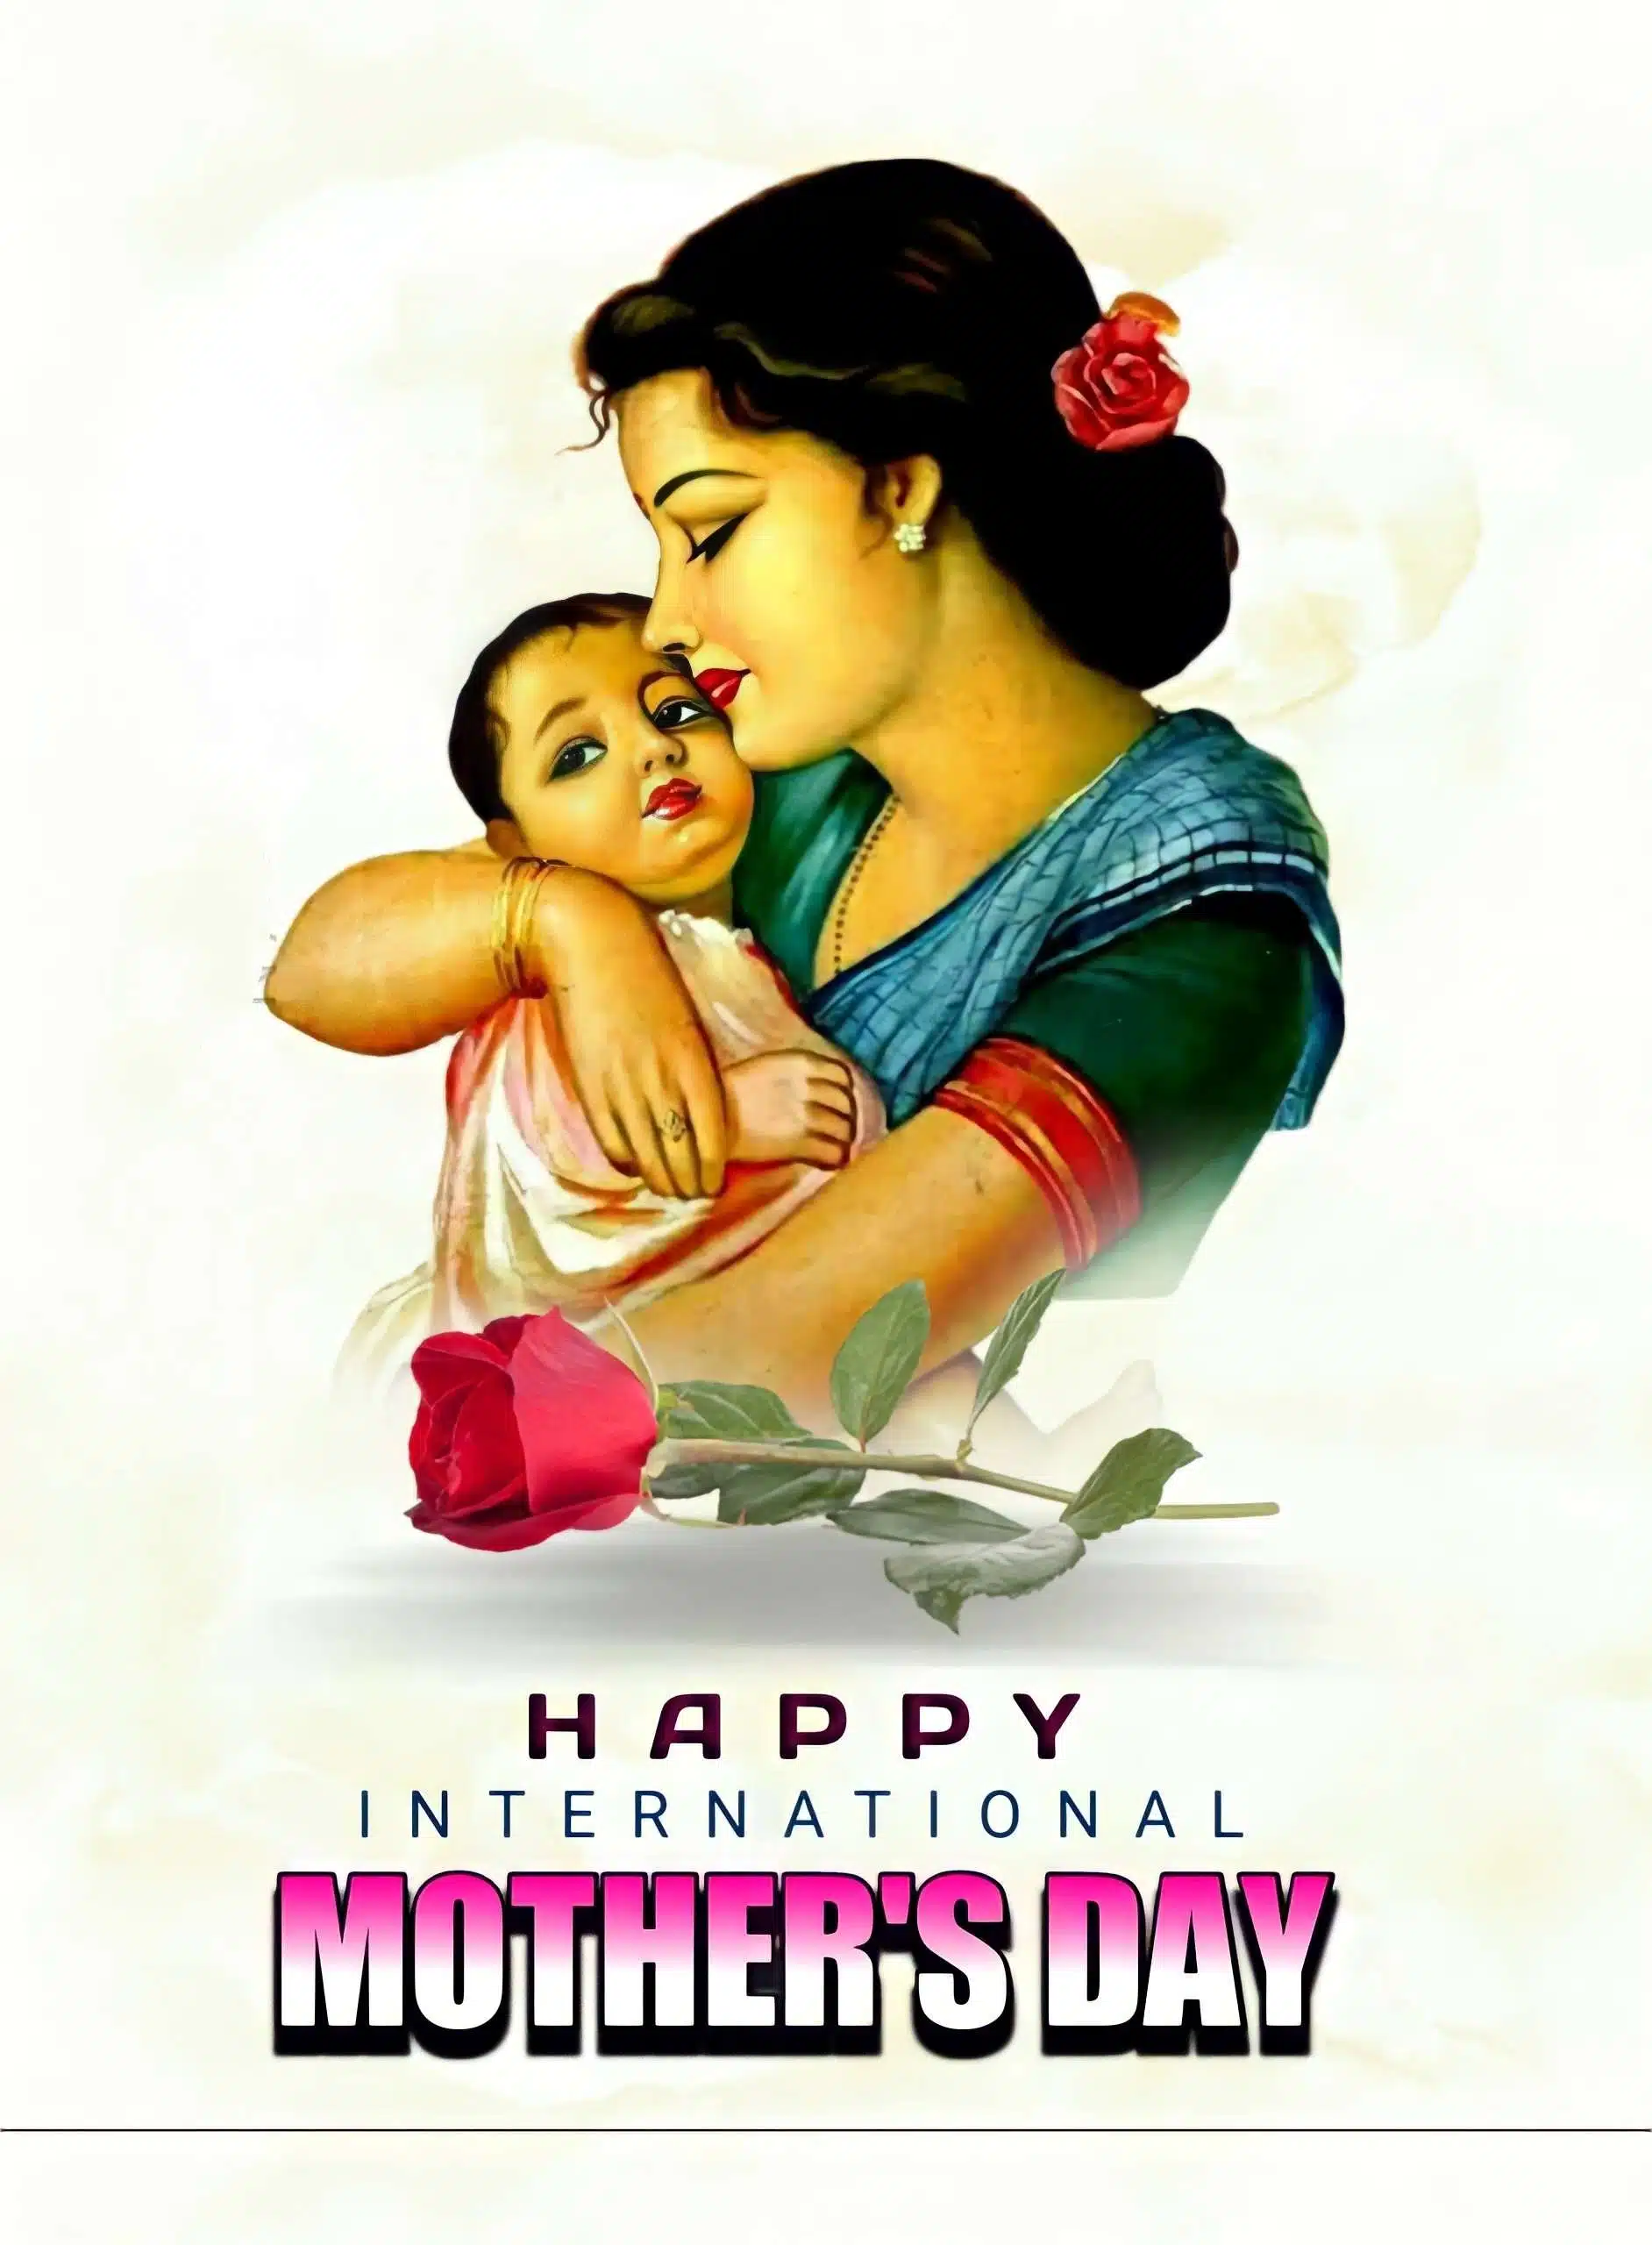 International Mothers Day Quotes In Marathi